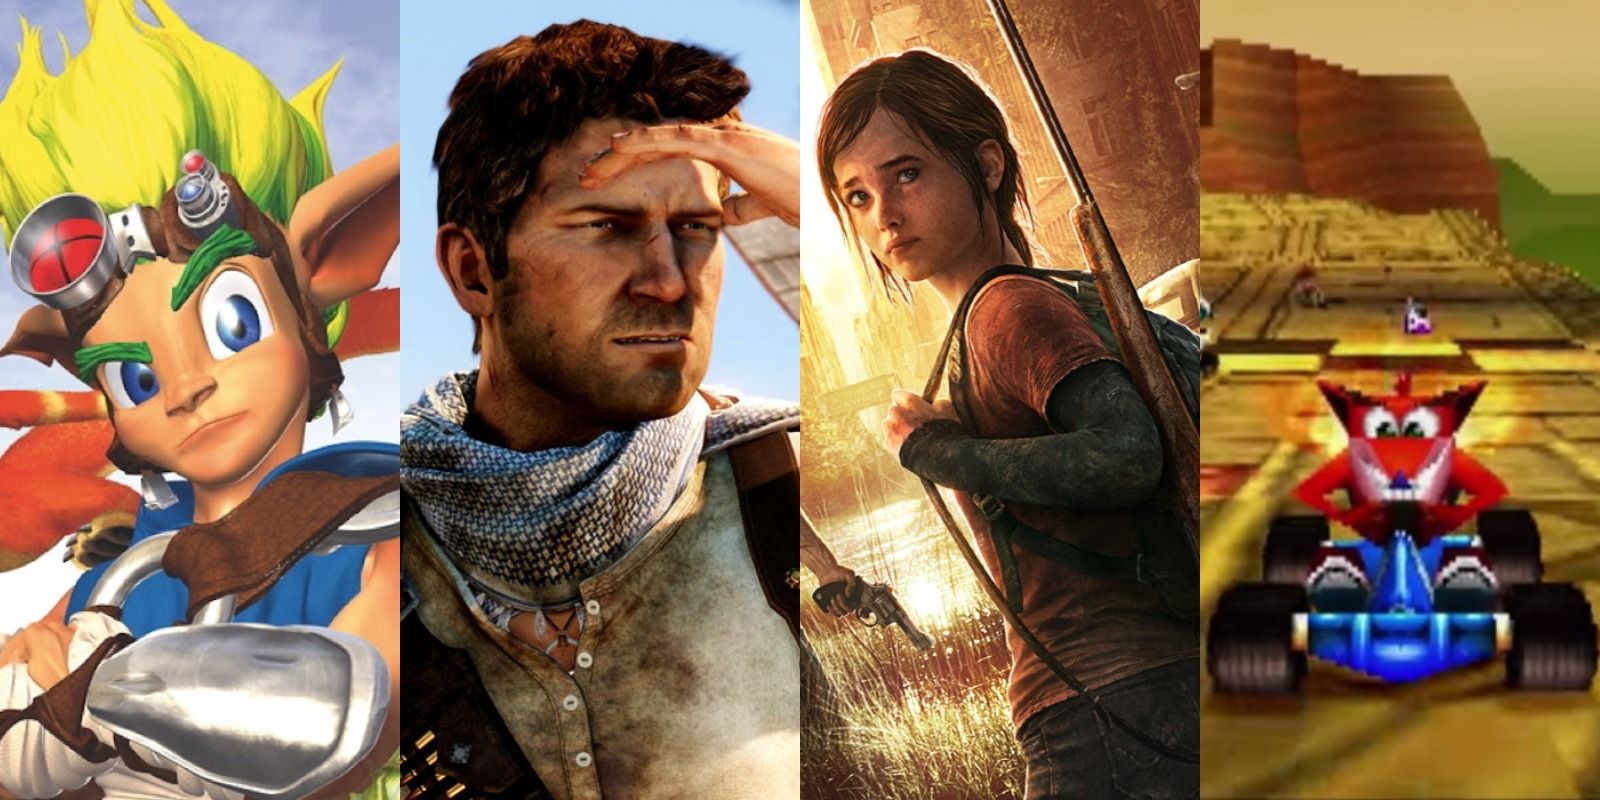 Every Naughty Dog Game Ranked From Worst To Best